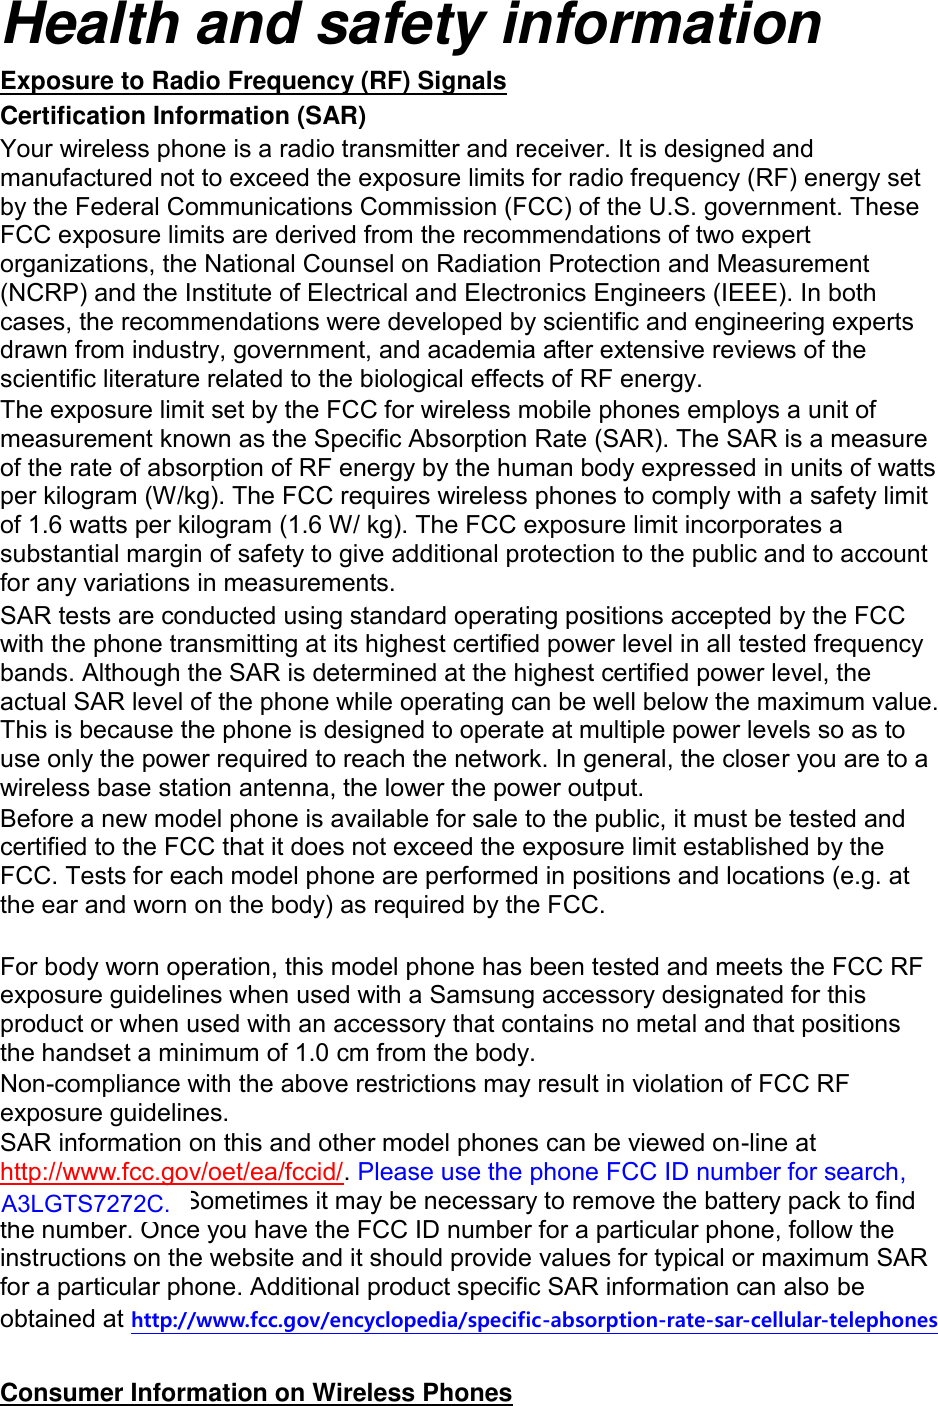 Health and safety information Exposure to Radio Frequency (RF) Signals Certification Information (SAR) Your wireless phone is a radio transmitter and receiver. It is designed and manufactured not to exceed the exposure limits for radio frequency (RF) energy set by the Federal Communications Commission (FCC) of the U.S. government. These FCC exposure limits are derived from the recommendations of two expert organizations, the National Counsel on Radiation Protection and Measurement (NCRP) and the Institute of Electrical and Electronics Engineers (IEEE). In both cases, the recommendations were developed by scientific and engineering experts drawn from industry, government, and academia after extensive reviews of the scientific literature related to the biological effects of RF energy. The exposure limit set by the FCC for wireless mobile phones employs a unit of measurement known as the Specific Absorption Rate (SAR). The SAR is a measure of the rate of absorption of RF energy by the human body expressed in units of watts per kilogram (W/kg). The FCC requires wireless phones to comply with a safety limit of 1.6 watts per kilogram (1.6 W/ kg). The FCC exposure limit incorporates a substantial margin of safety to give additional protection to the public and to account for any variations in measurements. SAR tests are conducted using standard operating positions accepted by the FCC with the phone transmitting at its highest certified power level in all tested frequency bands. Although the SAR is determined at the highest certified power level, the actual SAR level of the phone while operating can be well below the maximum value. This is because the phone is designed to operate at multiple power levels so as to use only the power required to reach the network. In general, the closer you are to a wireless base station antenna, the lower the power output. Before a new model phone is available for sale to the public, it must be tested and certified to the FCC that it does not exceed the exposure limit established by the FCC. Tests for each model phone are performed in positions and locations (e.g. at the ear and worn on the body) as required by the FCC.      For body worn operation, this model phone has been tested and meets the FCC RF exposure guidelines when used with a Samsung accessory designated for this product or when used with an accessory that contains no metal and that positions the handset a minimum of 1.0 cm from the body.   Non-compliance with the above restrictions may result in violation of FCC RF exposure guidelines. SAR information on this and other model phones can be viewed on-line at http://www.fcc.gov/oet/ea/fccid/. Please use the phone FCC ID number for search, A3LGTS7278U. Sometimes it may be necessary to remove the battery pack to find the number. Once you have the FCC ID number for a particular phone, follow the instructions on the website and it should provide values for typical or maximum SAR for a particular phone. Additional product specific SAR information can also be obtained at http://www.fcc.gov/encyclopedia/specific-absorption-rate-sar-cellular-telephones  Consumer Information on Wireless Phones A3LGTS7272C. 